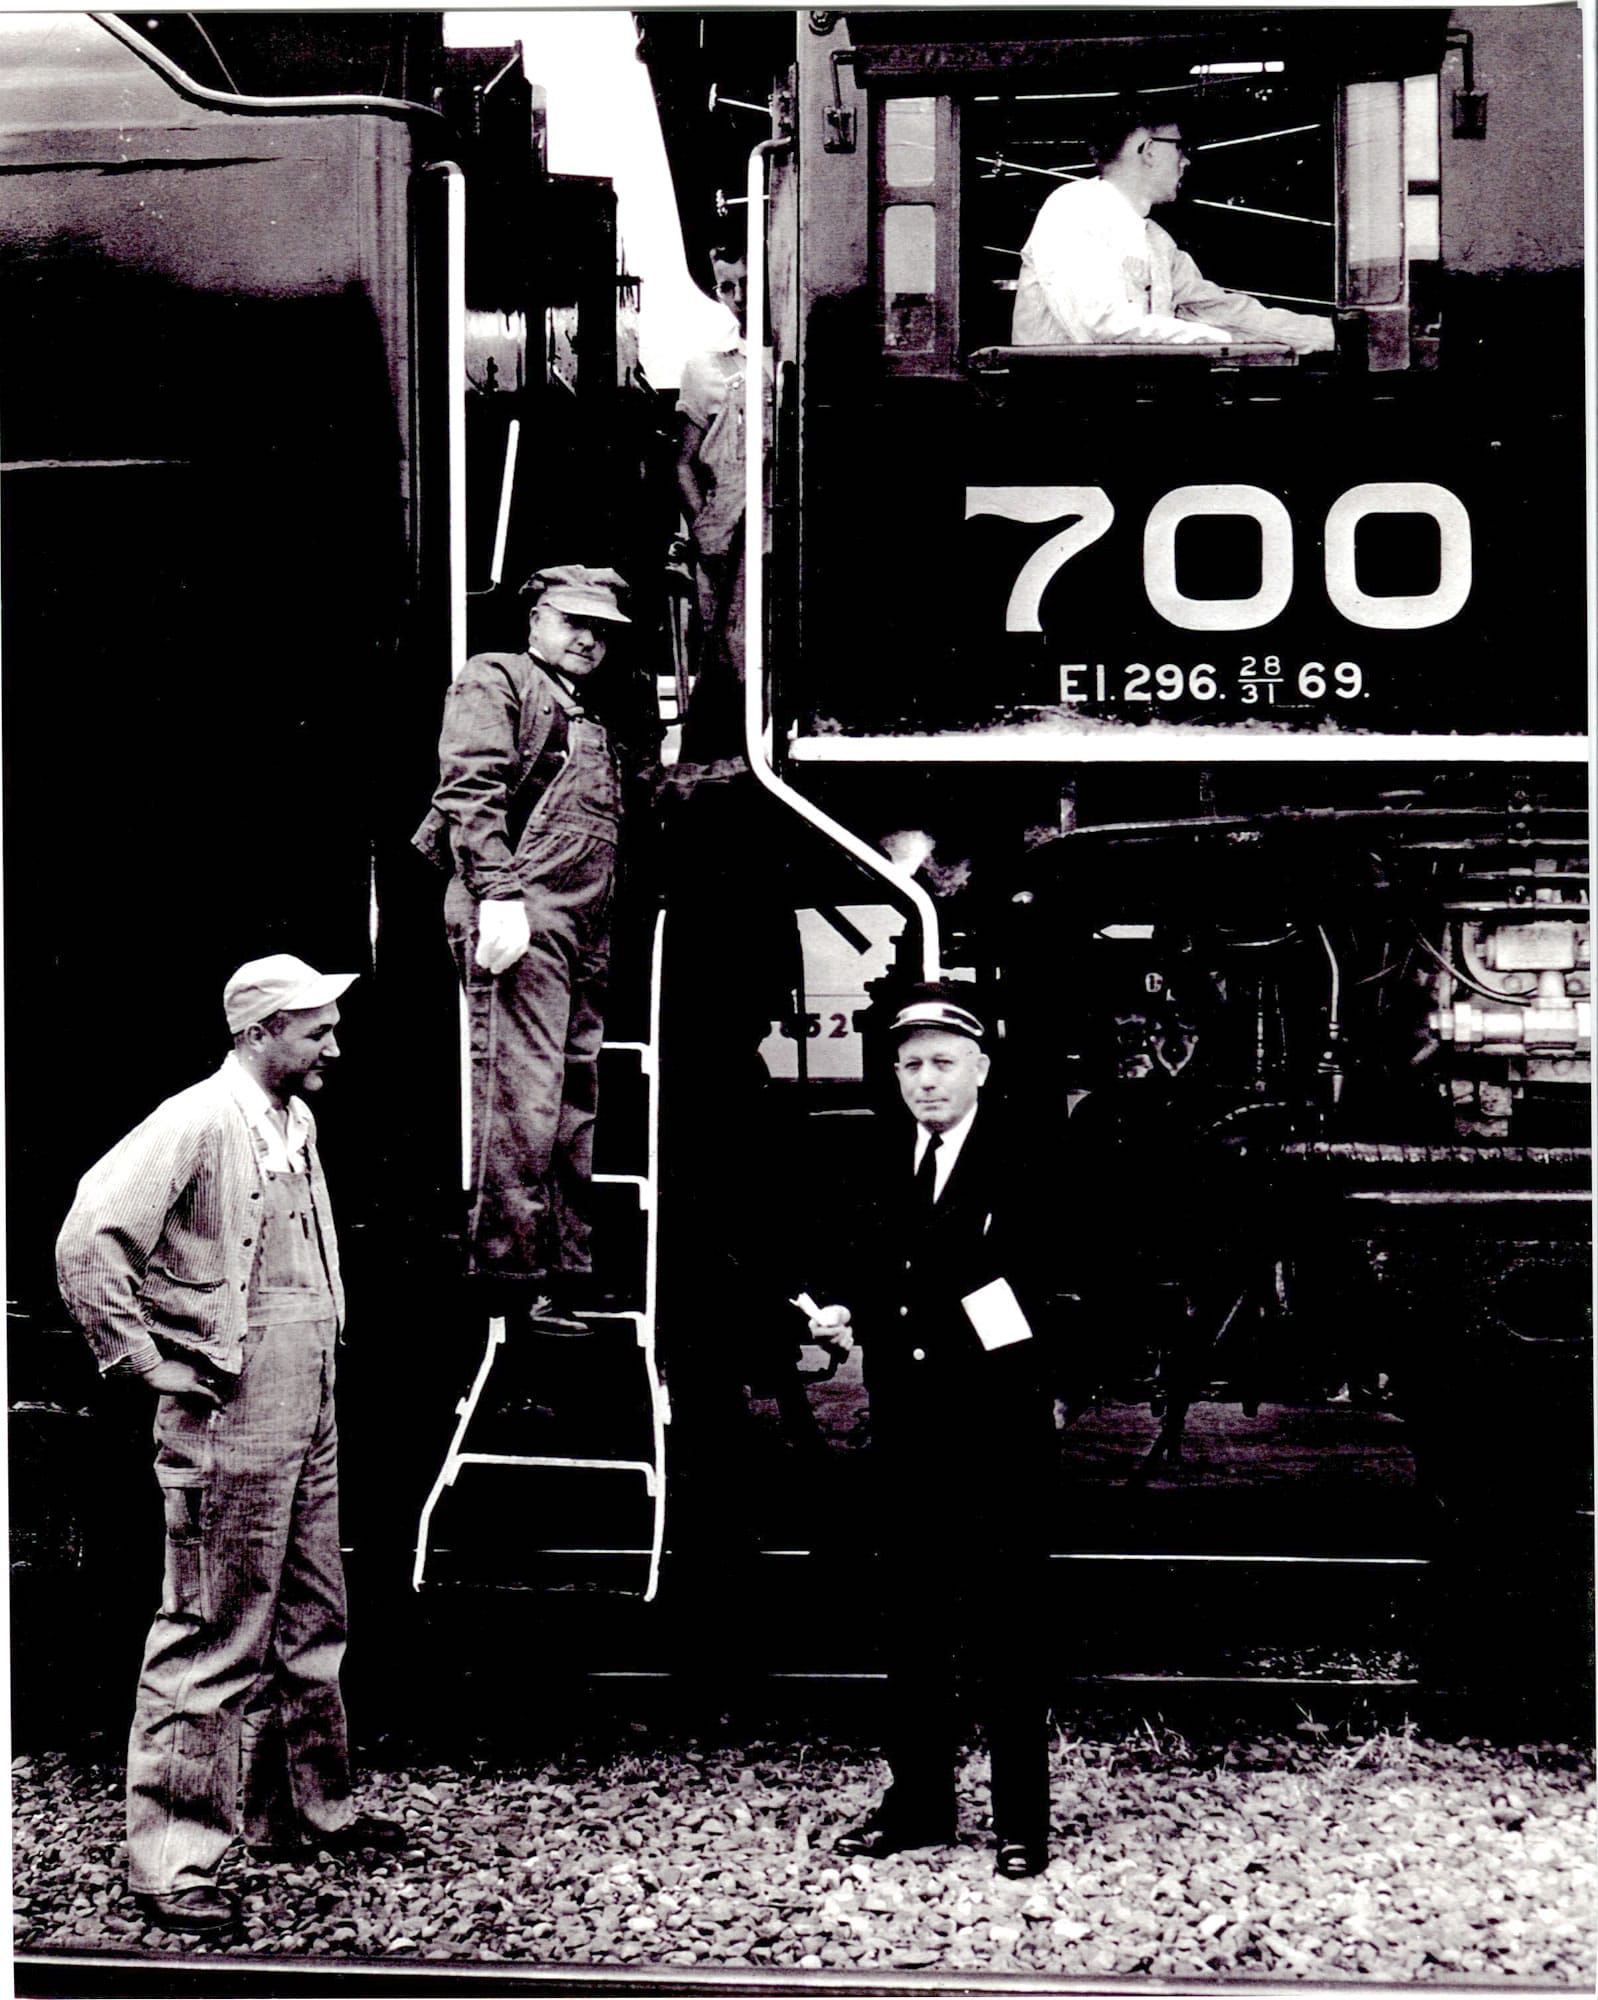 Bob Mercer, far left in overalls, was fireman on the final run of the SP&amp;S (Spokane, Portland and Seattle) 700 steam engine, from Union Station in Portland to Wishram. This photo was taken on May 20, 1955, and also pictured are engineer Tommy Crane, conductor H.L.